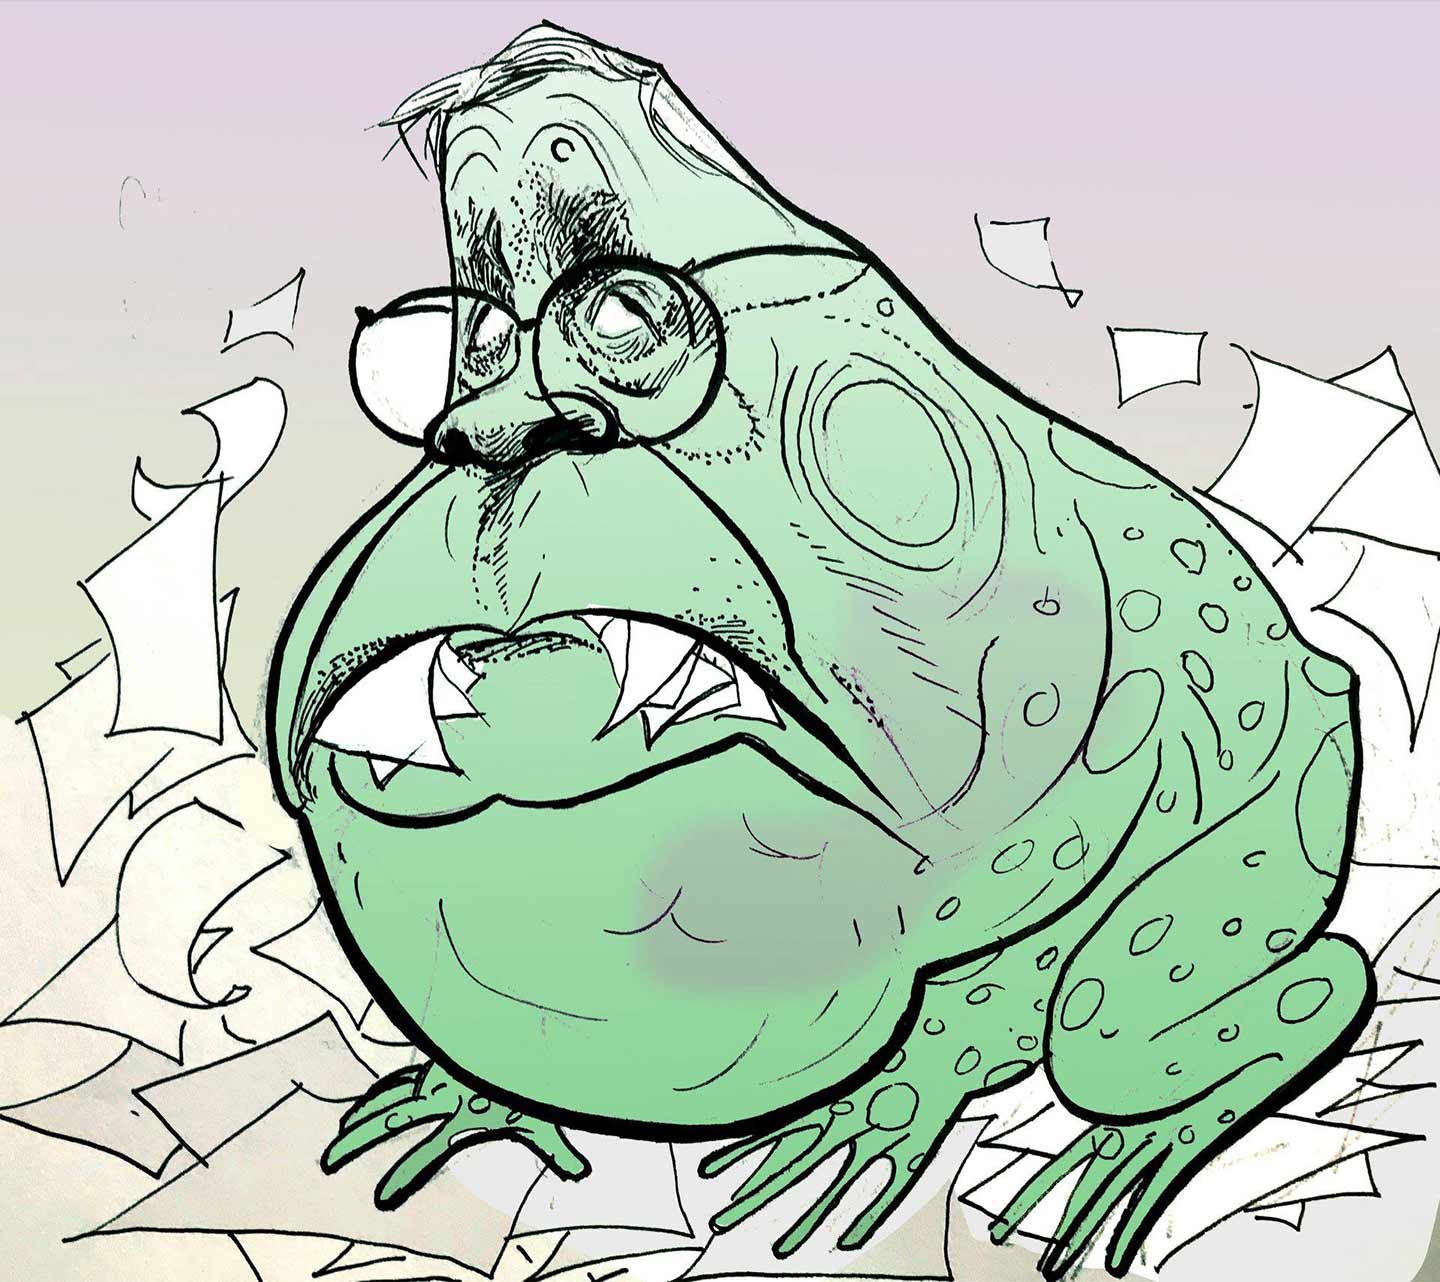 Screw The Public's "Exhaustion" With Mueller's Report - House Dems Need To Impeach The Toad Called Barr